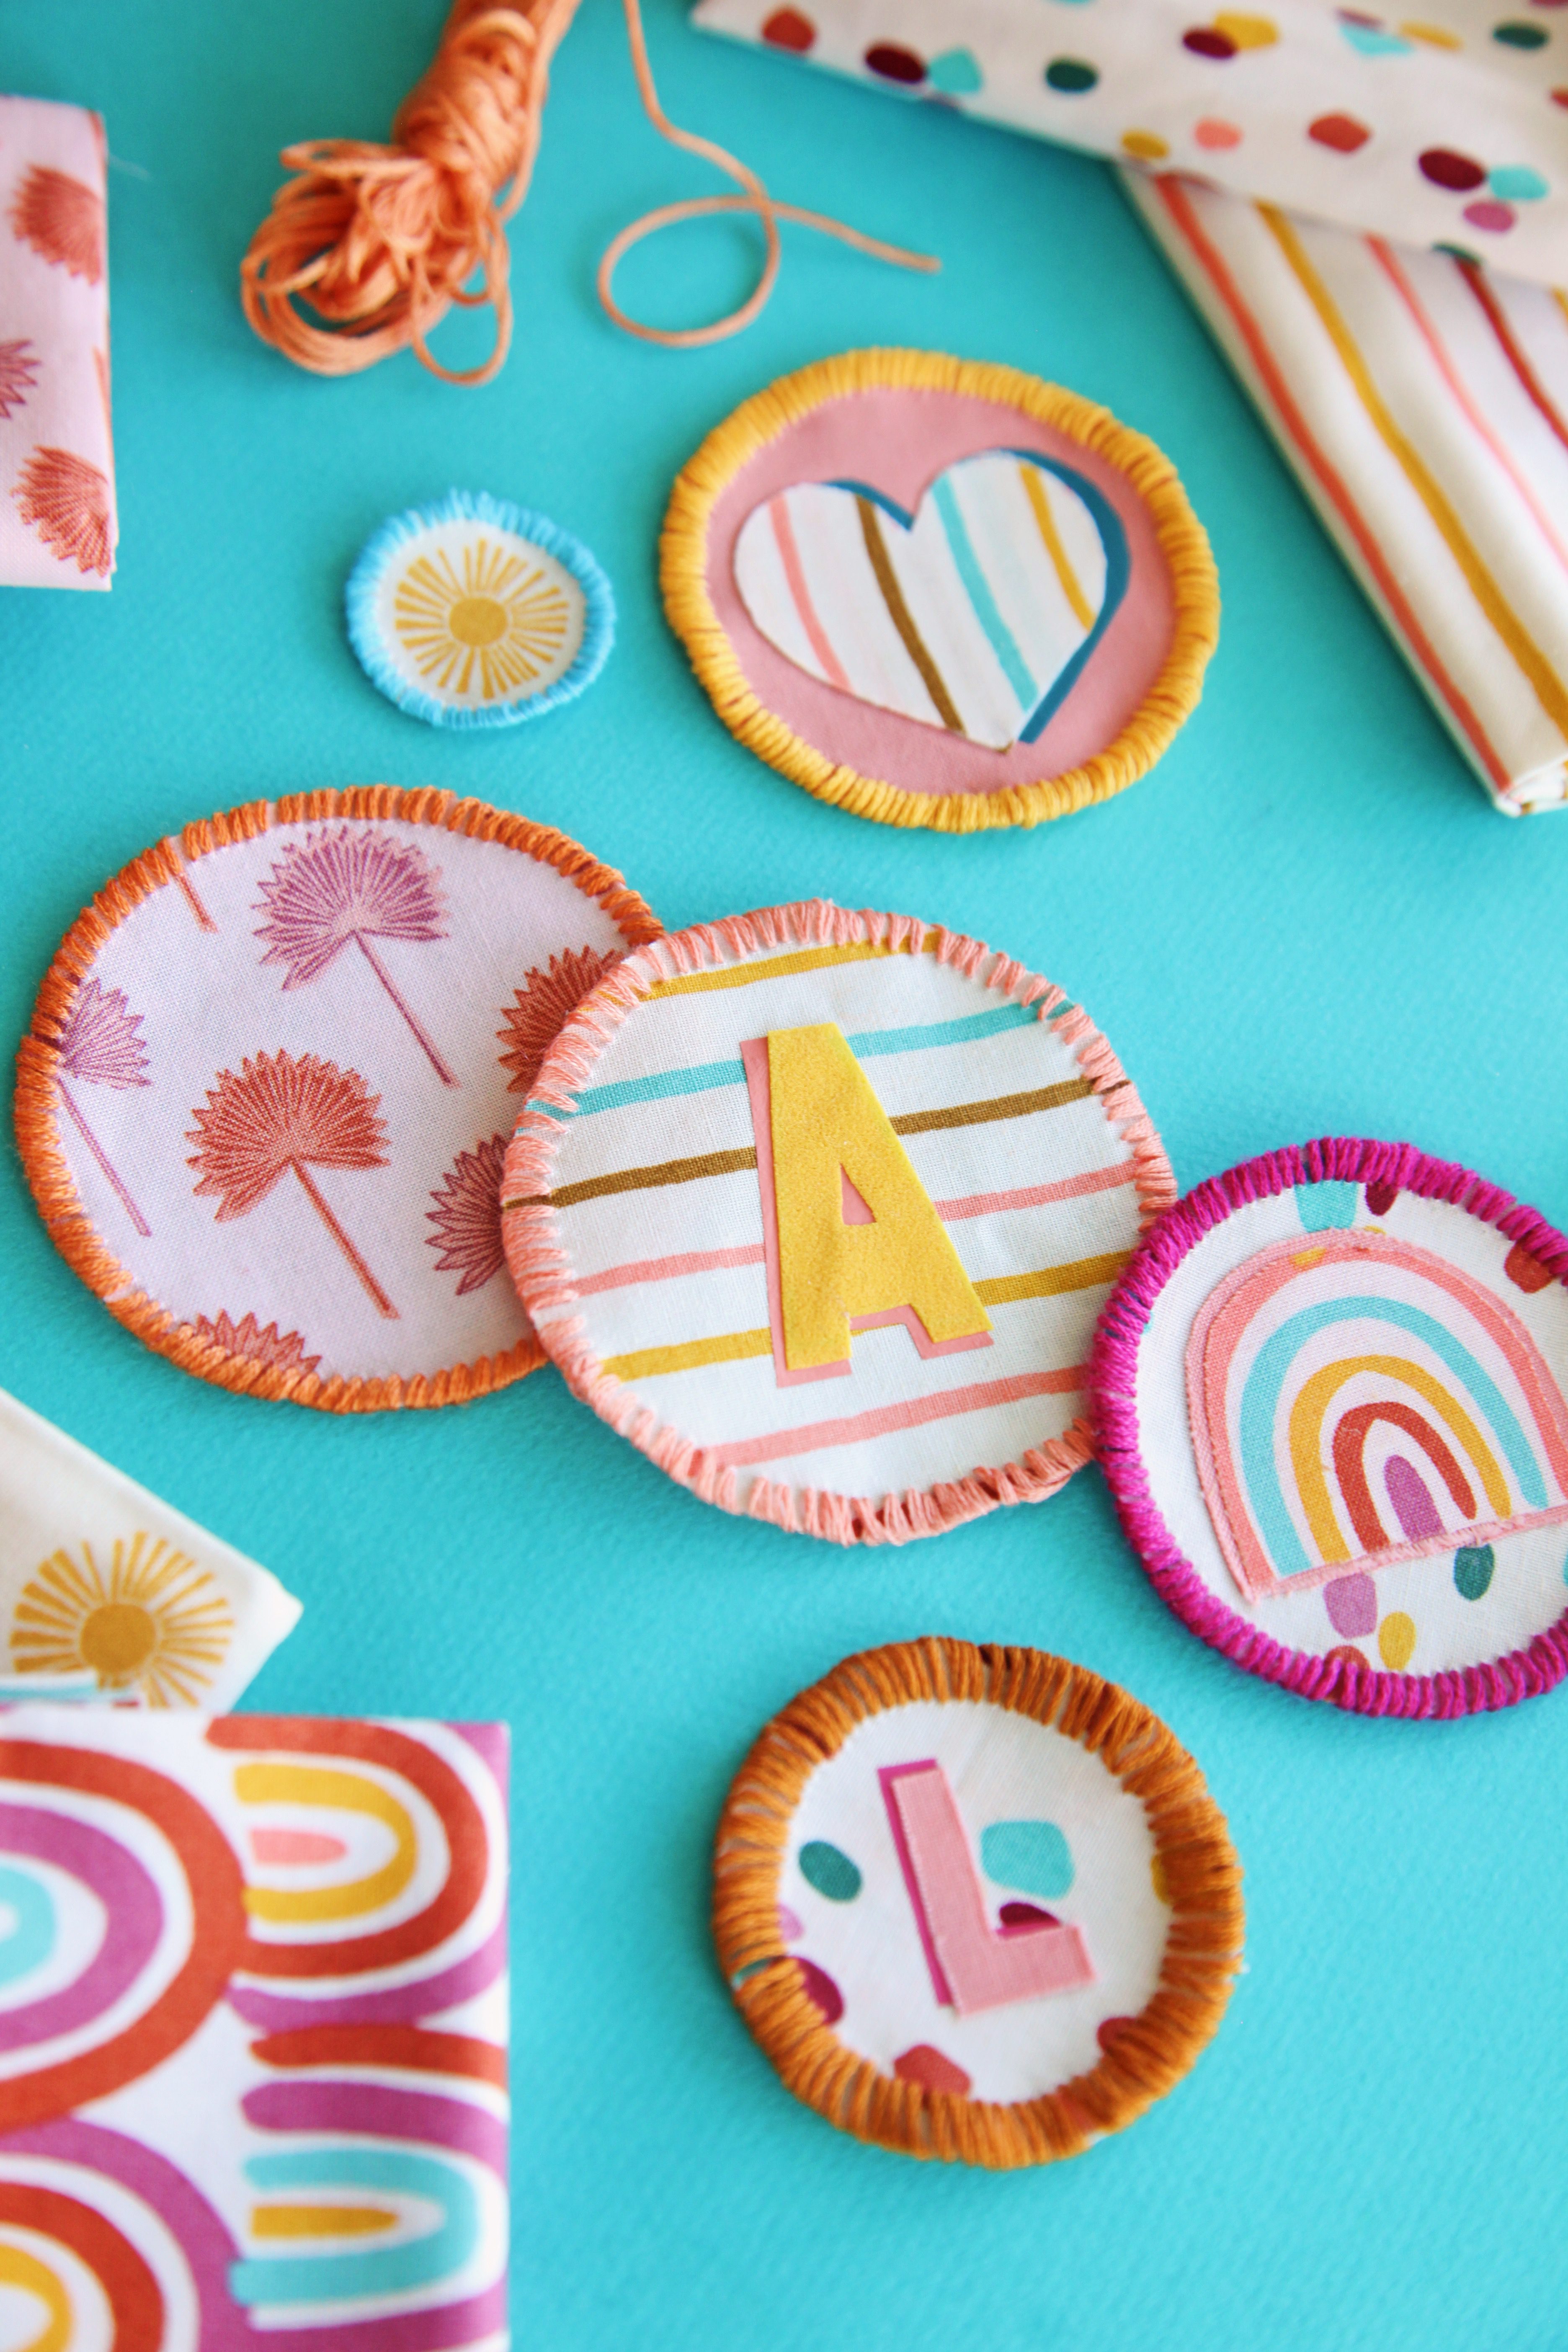 DIY Fabric Patches Step by Step Tutorial + a tutorial featured by Top US Craft Blog + The Pretty Life Girls